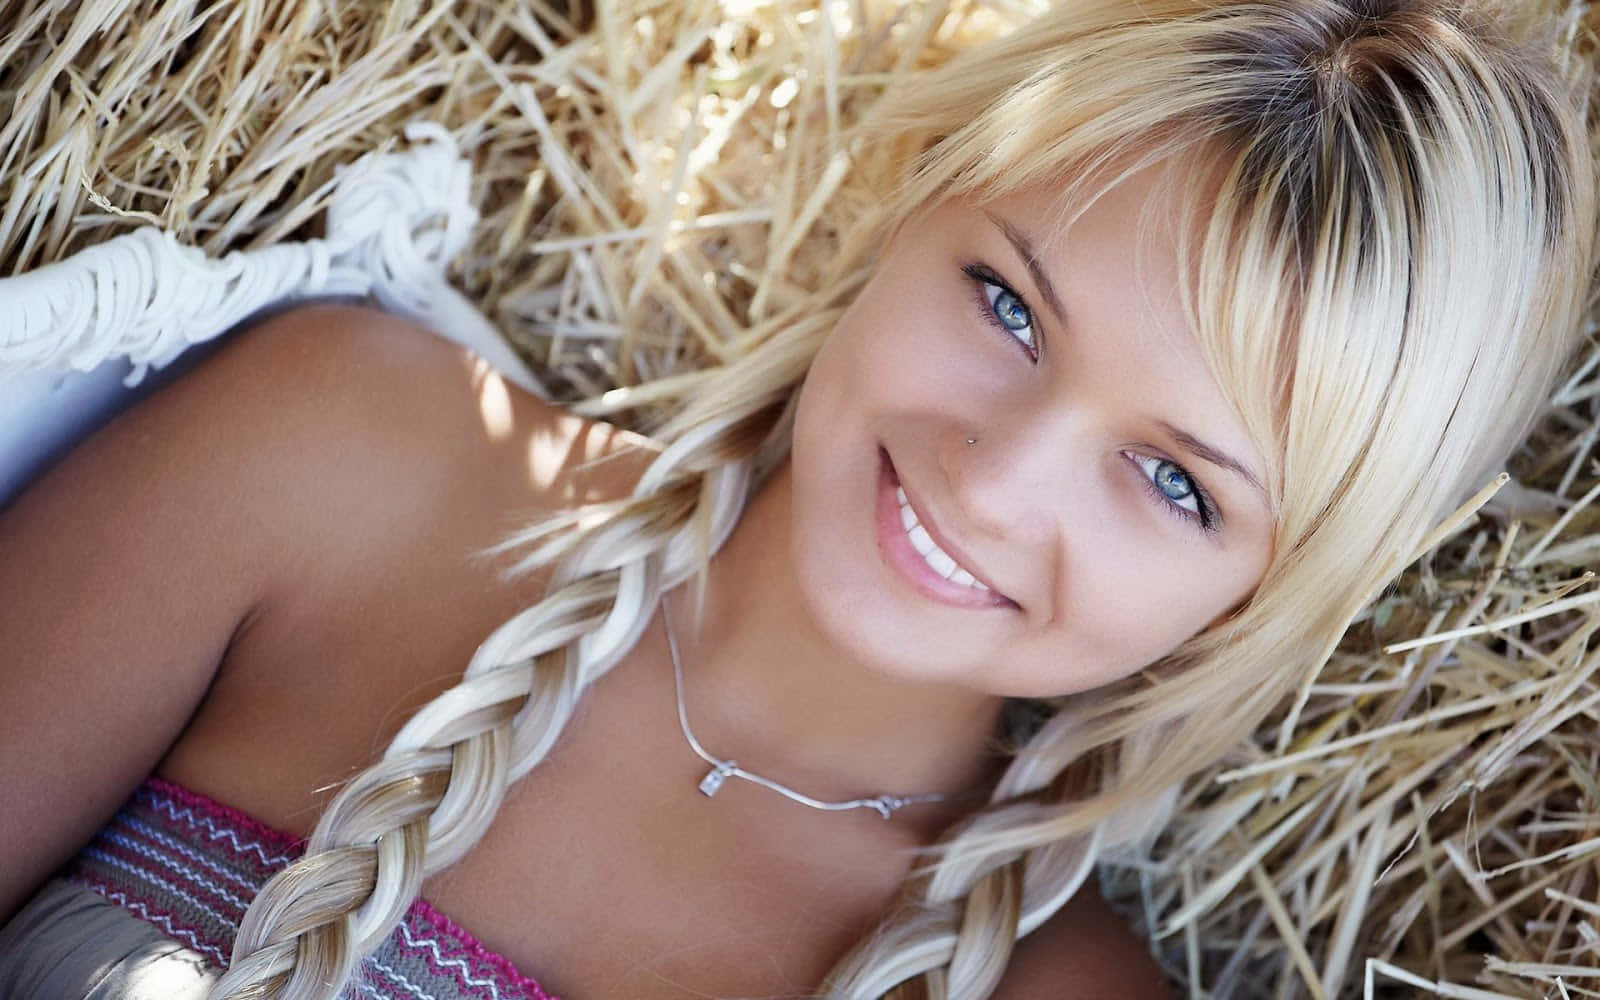 Blonde Braded Teenage Girl Pictures